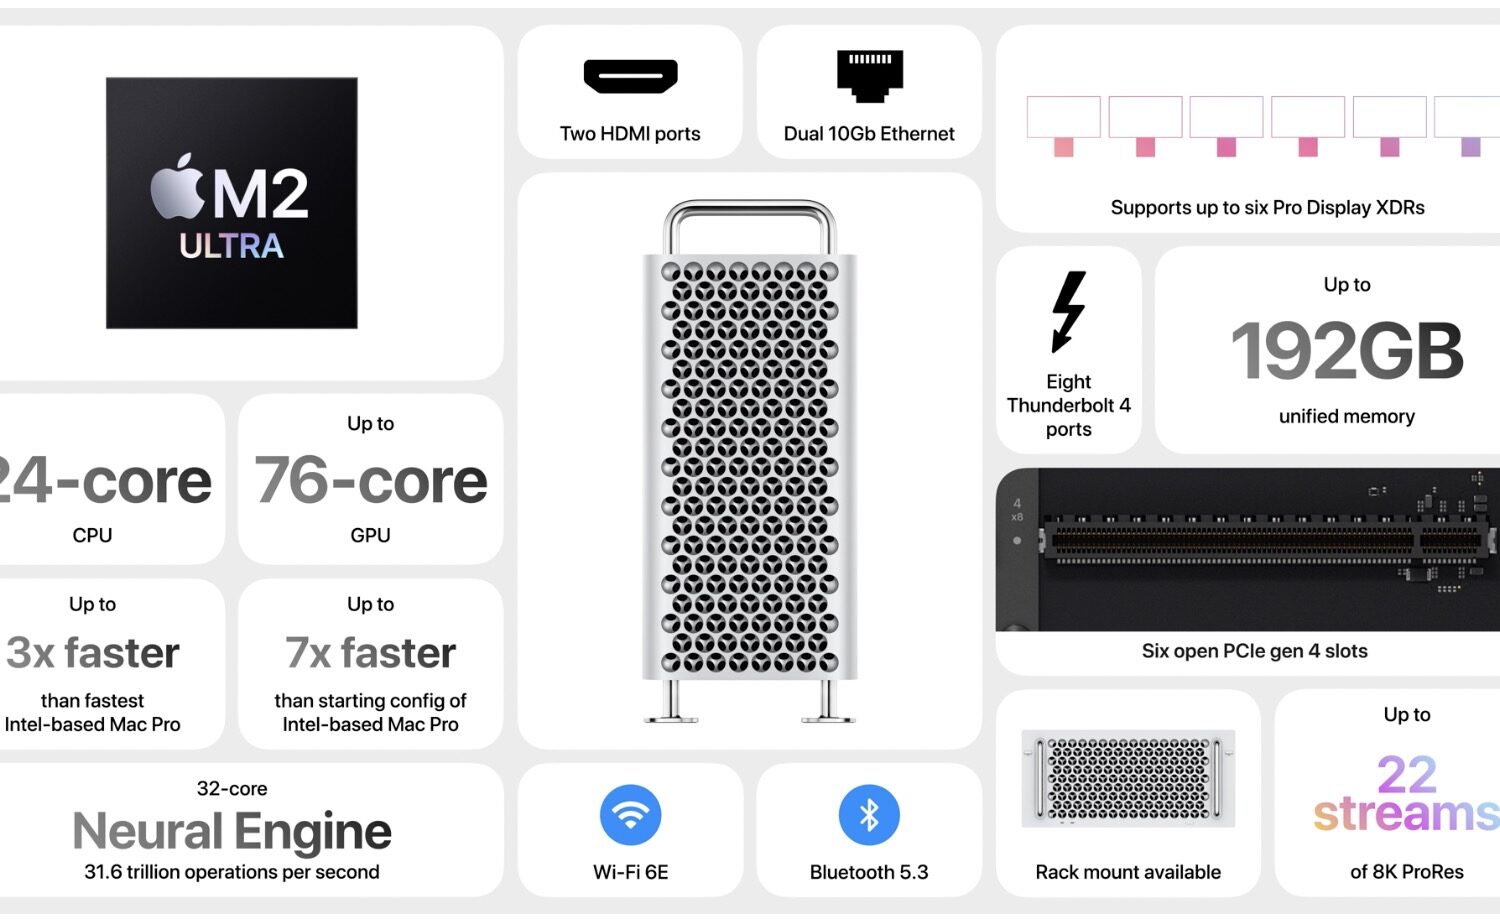 Apple's slide listing the key features of the 2023 M2 Ultra Mac Pro